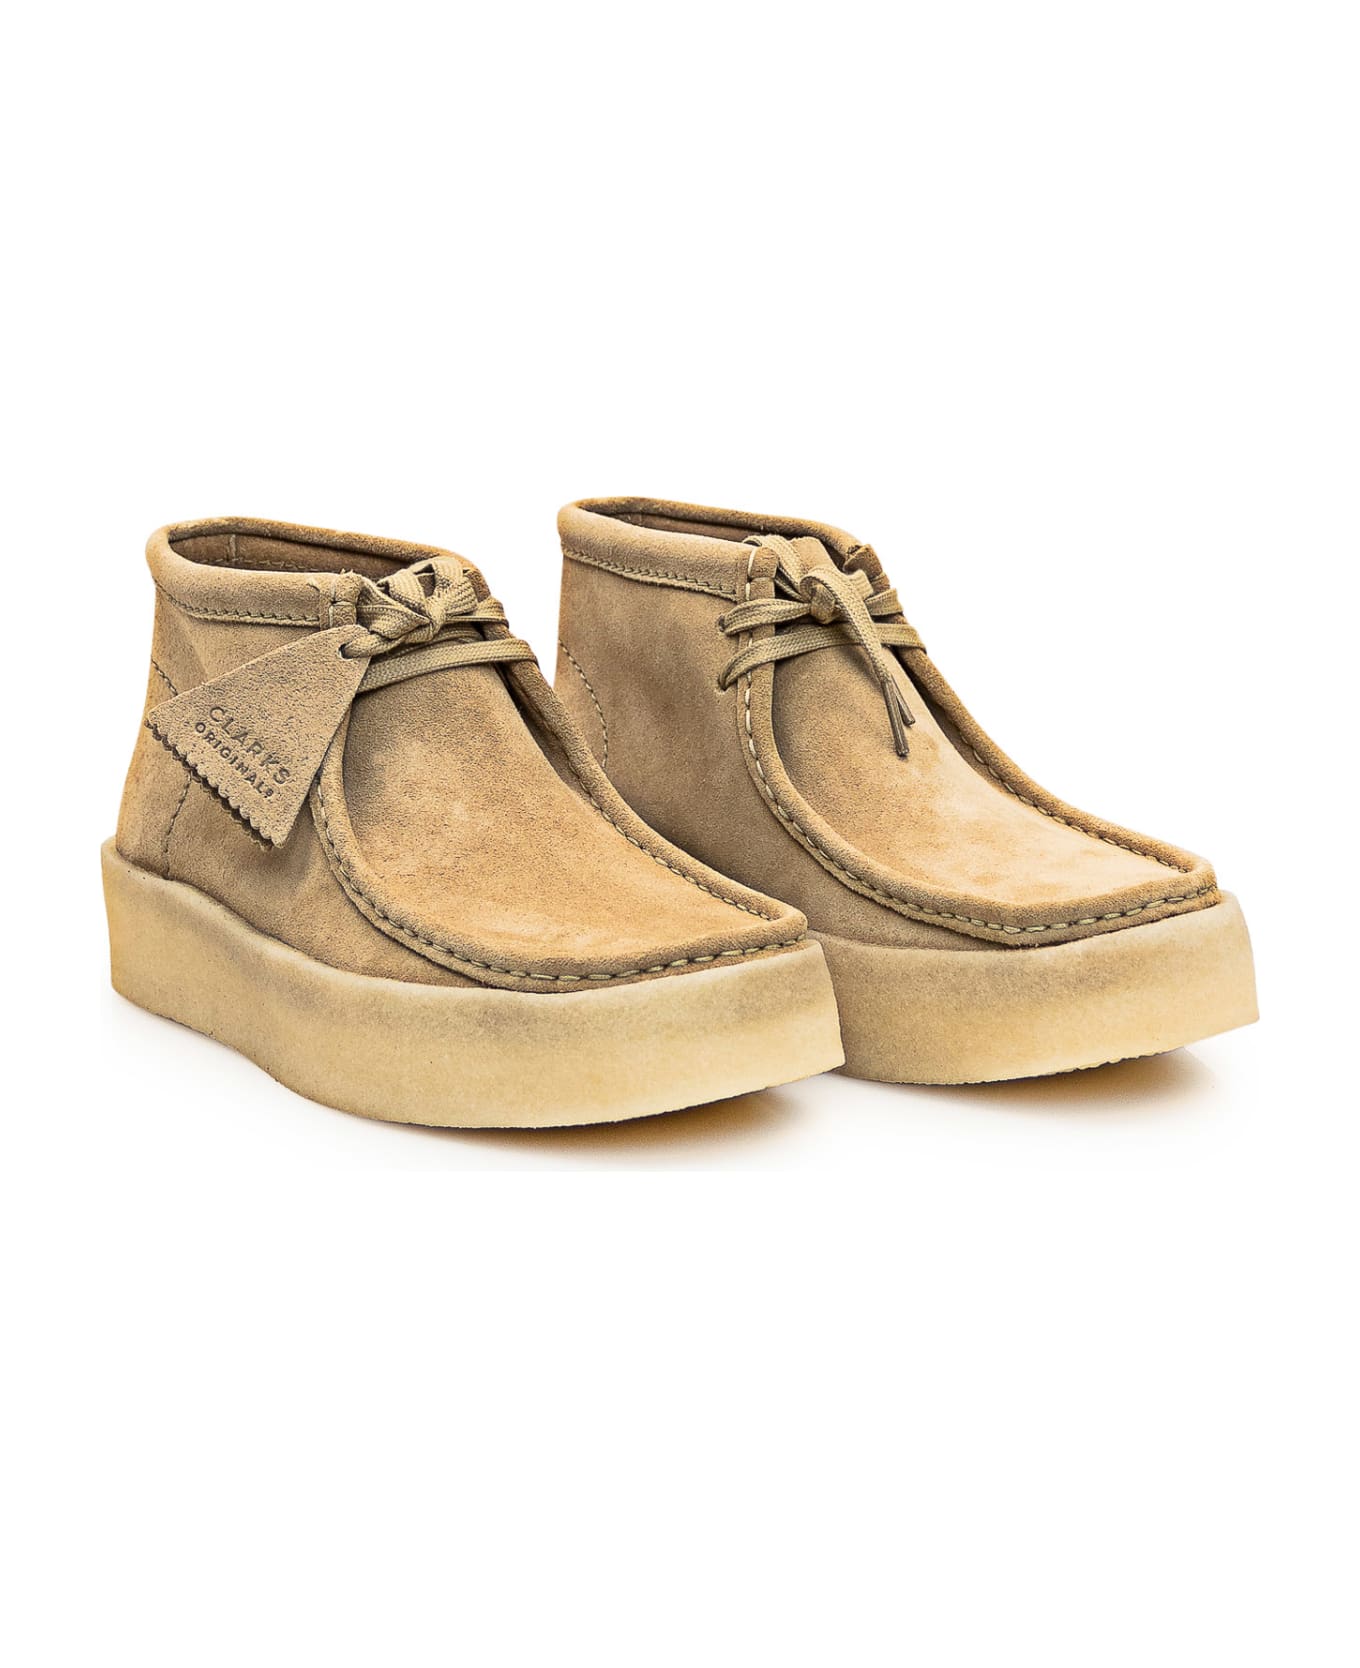 Clarks Wallabeecup Boots - MAPLE SUEDE